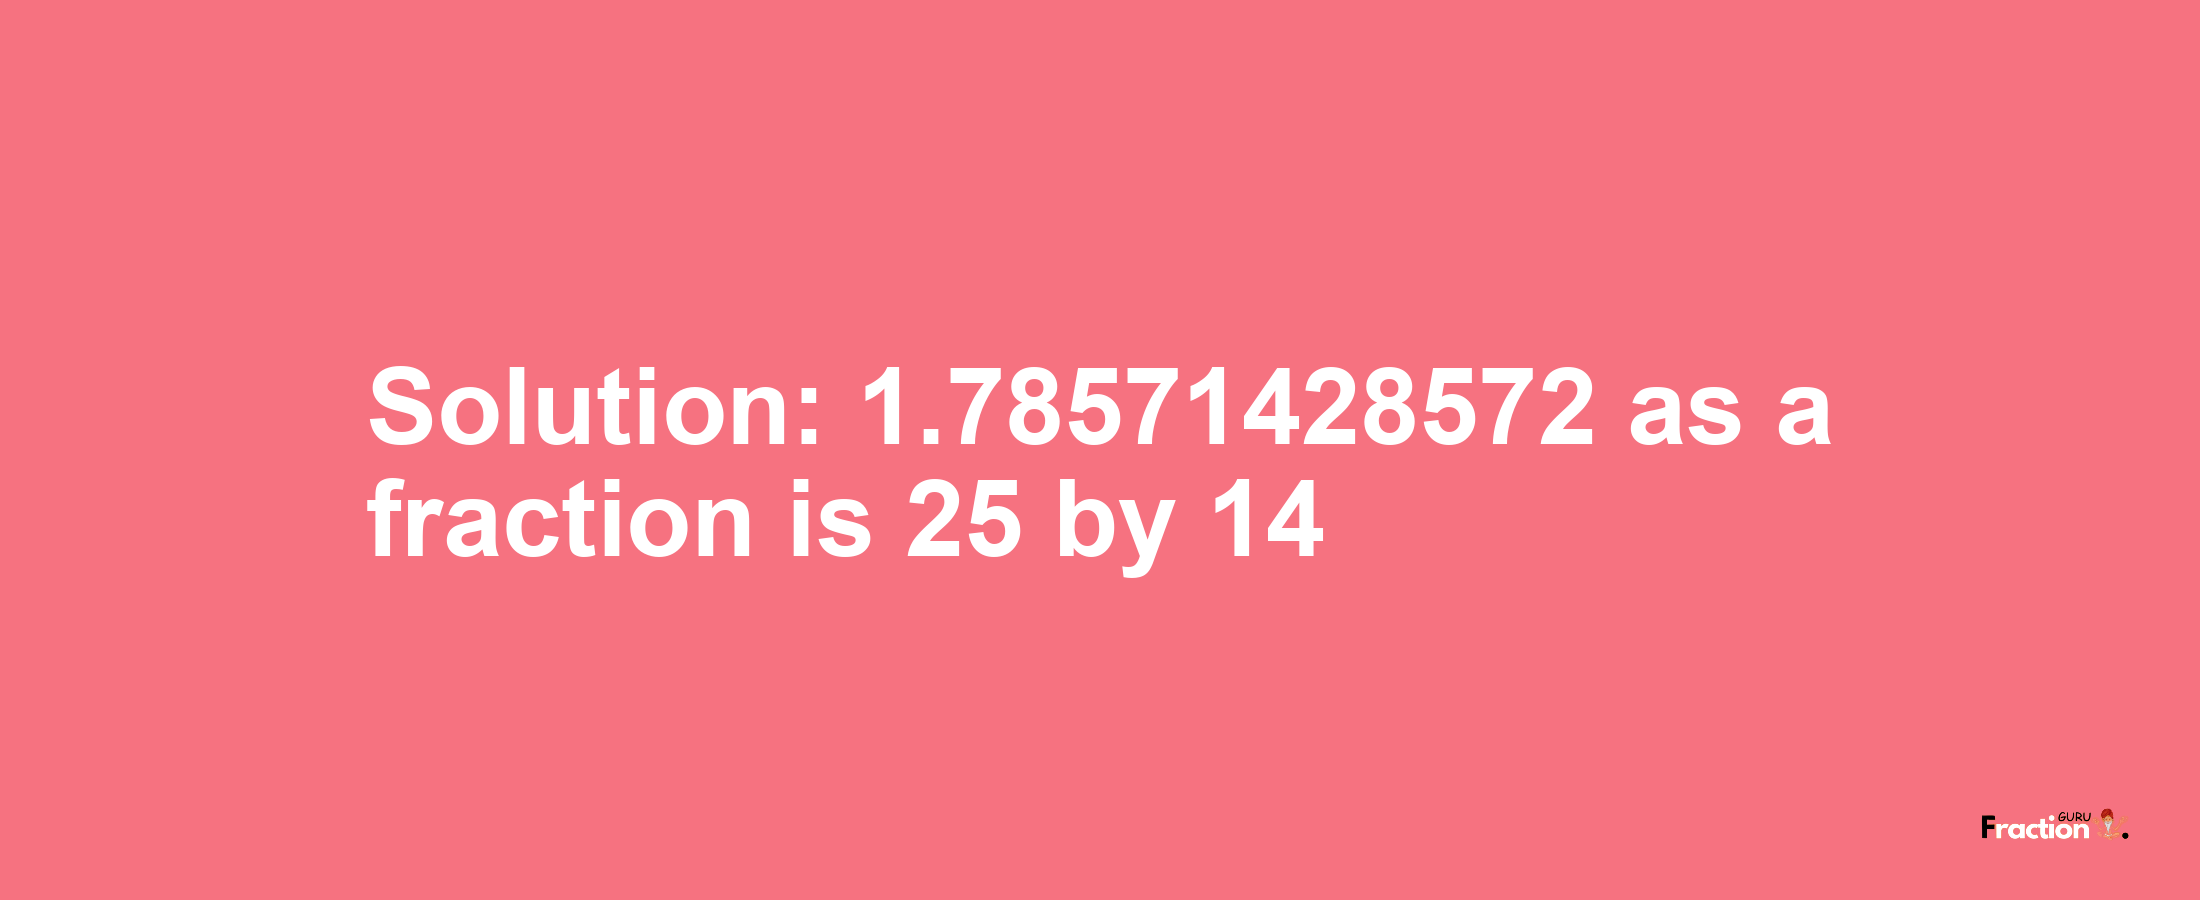 Solution:1.78571428572 as a fraction is 25/14